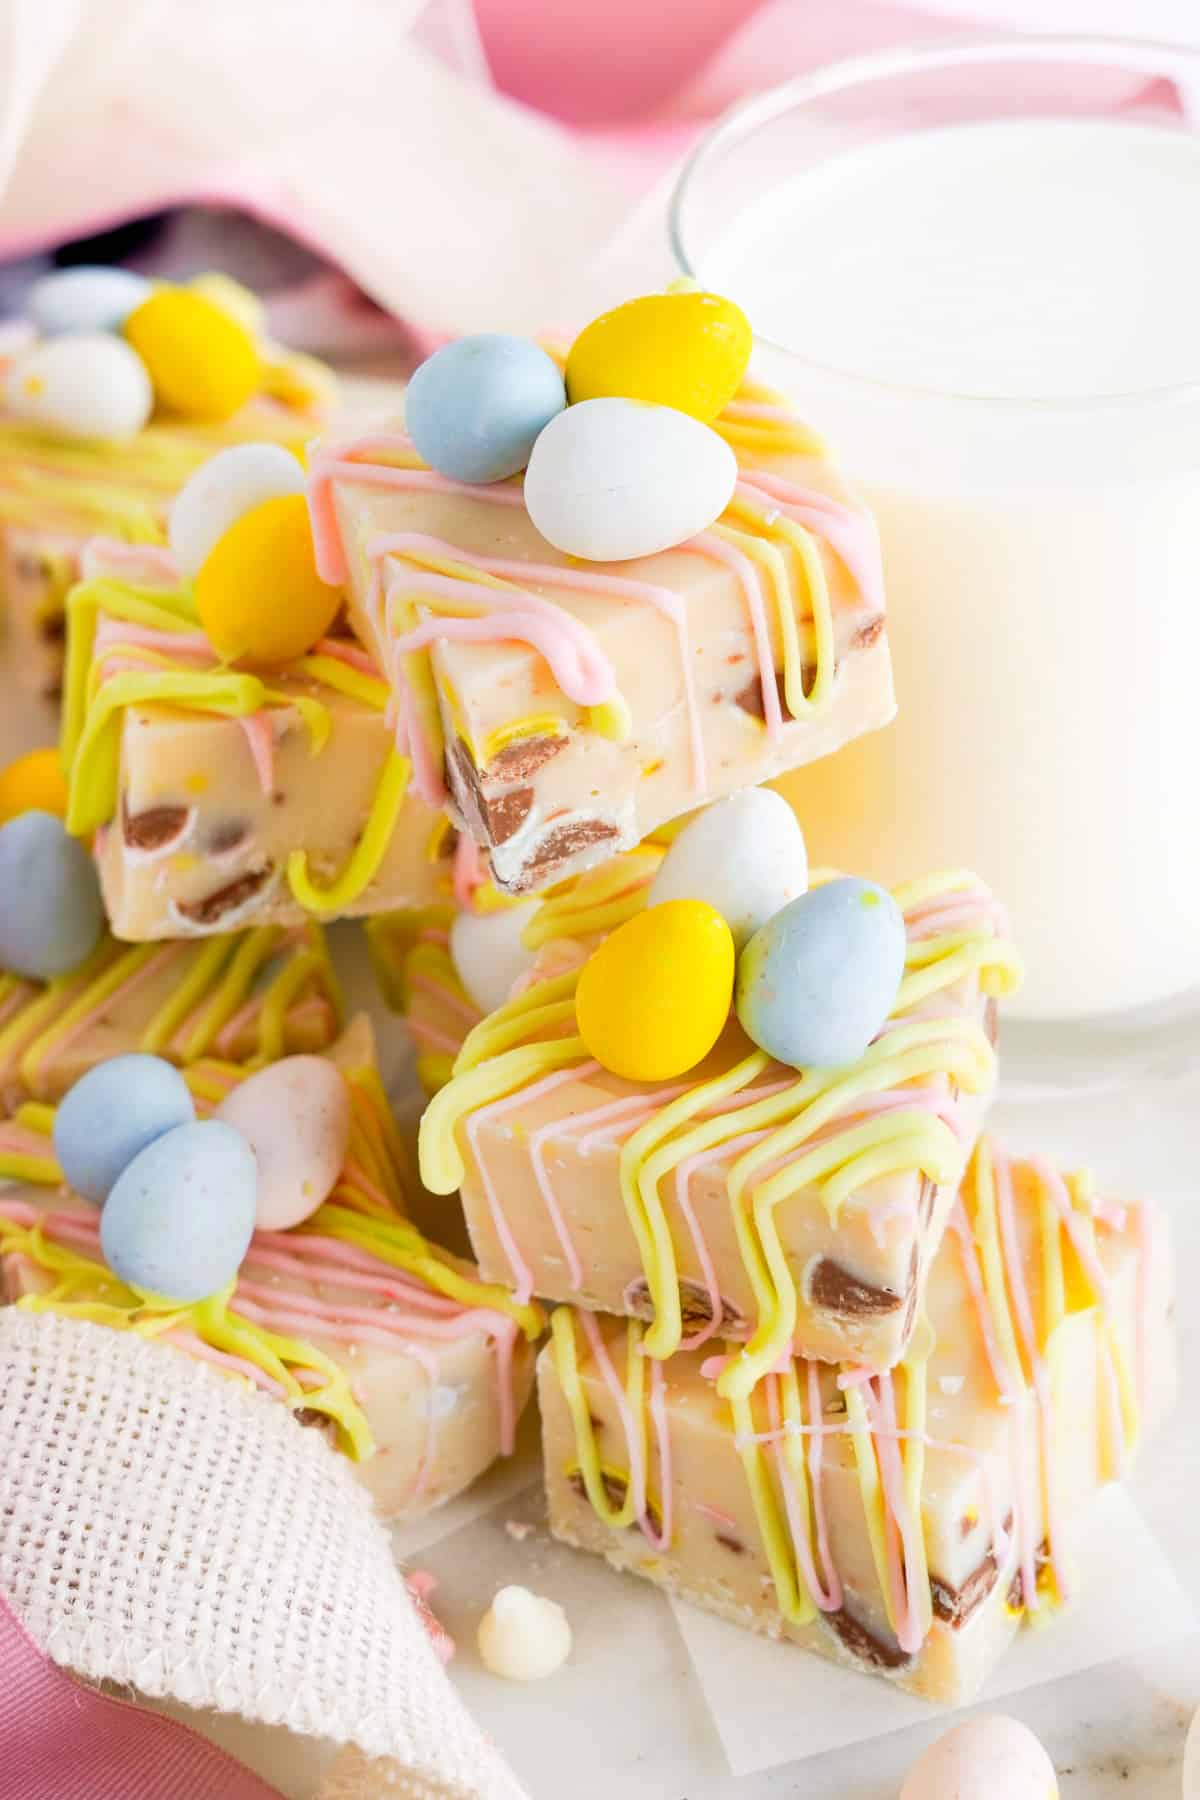 Multiple pieces of easter fudge decorated with mini chocolate eggs stacked high next to a glass of milk.